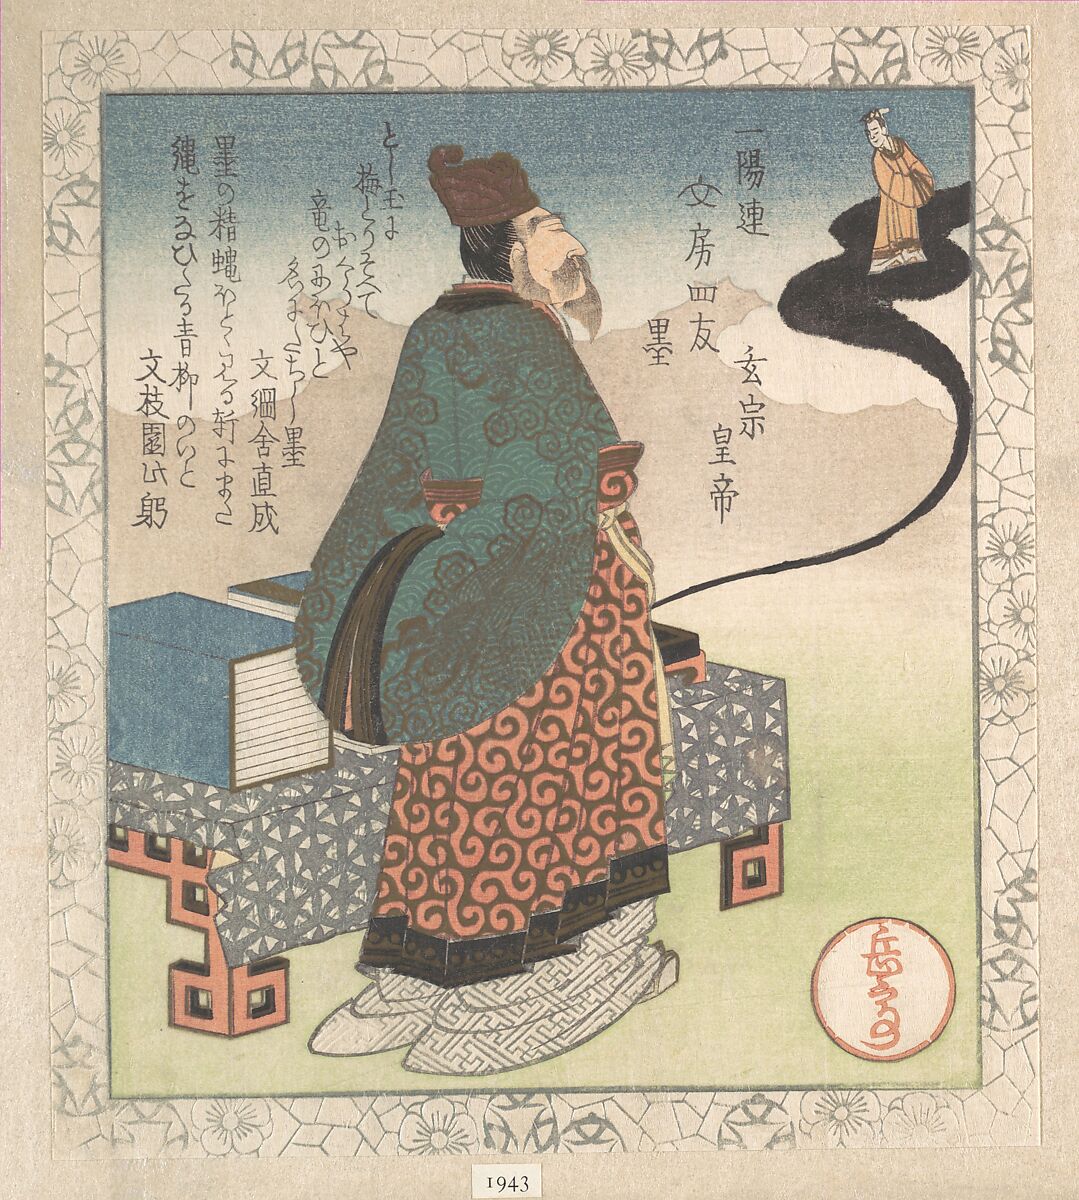 Emperor Xuanzong (Japanese: Gensō) and Daoist Magician Lo Gongyuan Arising from an Inkstone; “Ink” (Sumi), from Four Friends of the Writing Table for the Ichiyō Poetry Circle (Ichiyō-ren Bunbō shiyū)
From the Spring Rain Collection (Harusame shū), vol. 1, Yashima Gakutei (Japanese, 1786?–1868), Woodblock print (surimono); ink and color on paper, Japan 